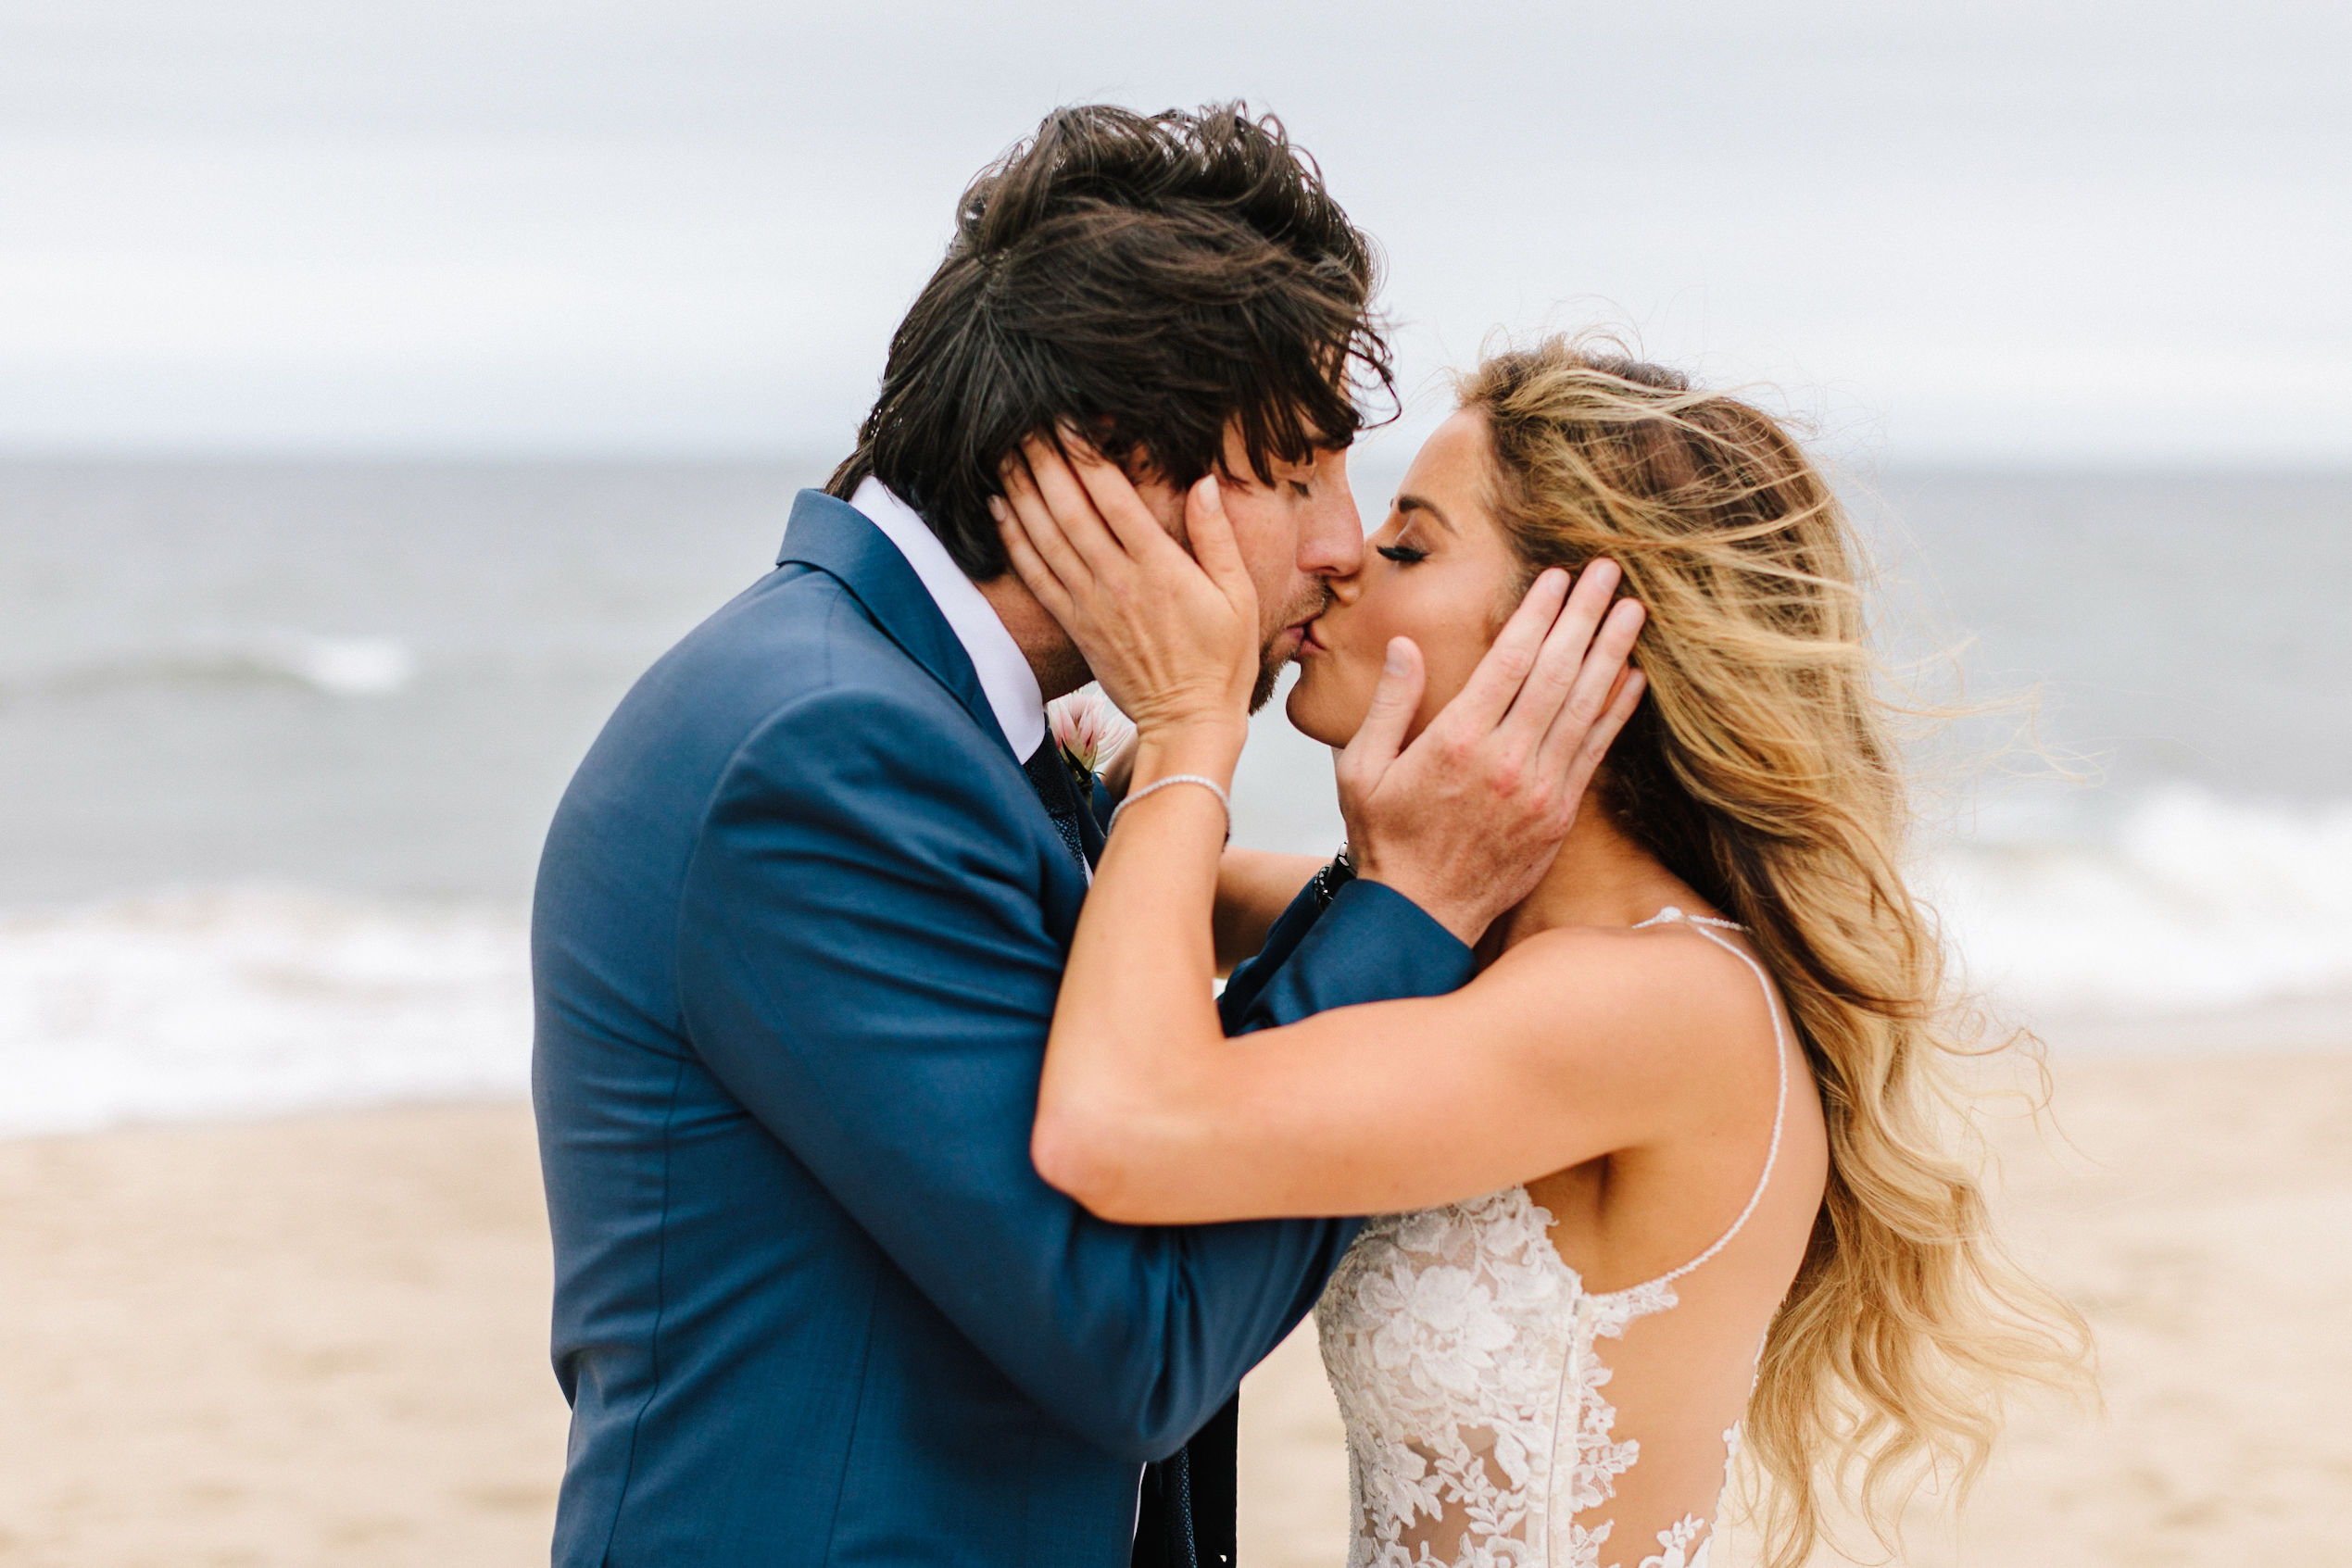 Bride and groom kissing on the beach with the shoreline in background.